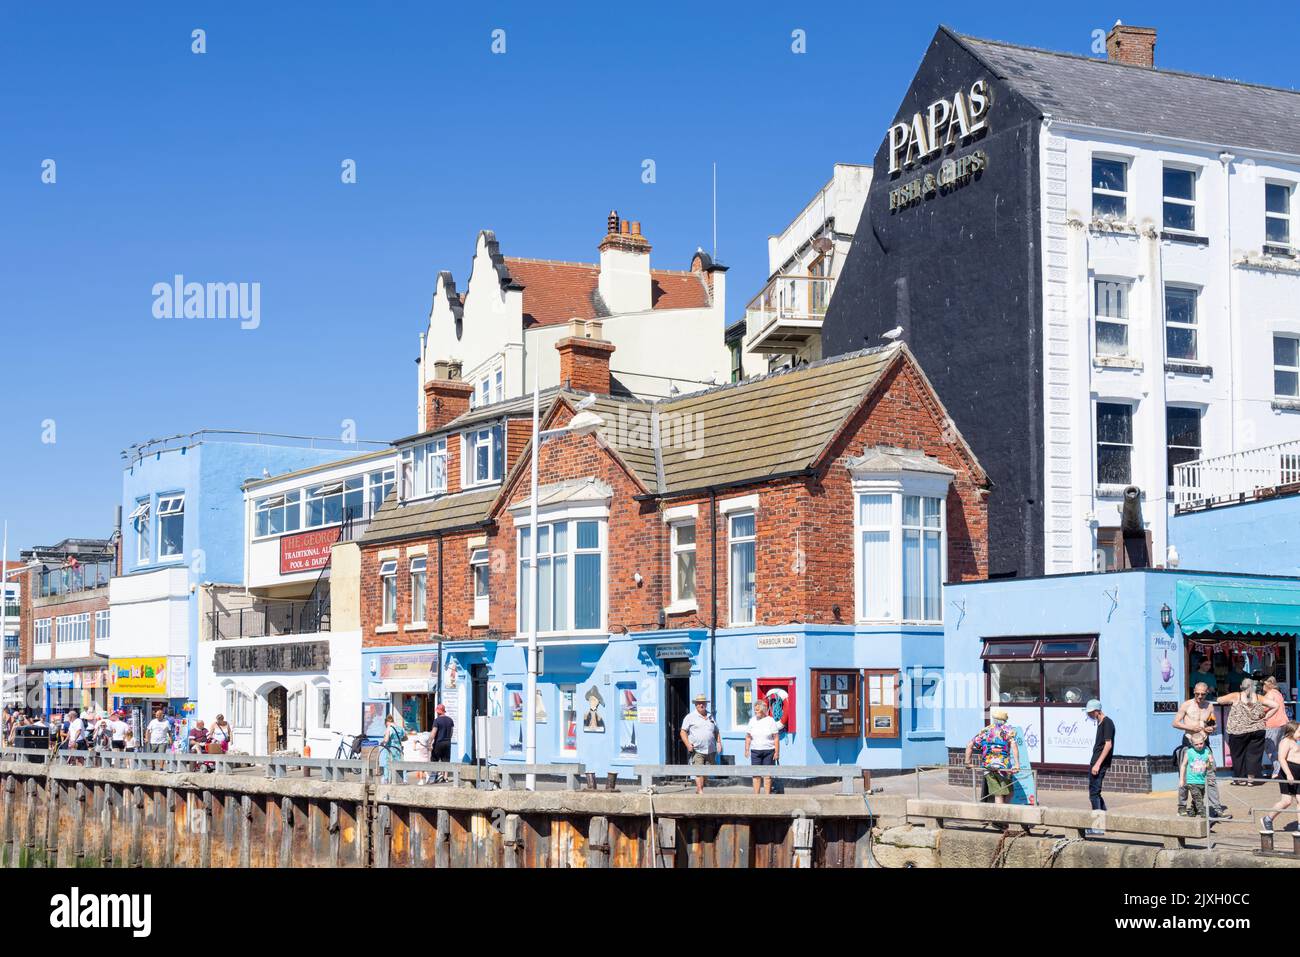 Bridlington Harbour wall with Papa's fish and chips restaurant Bridlington East Riding of Yorkshire England UK GB Europe Stock Photo